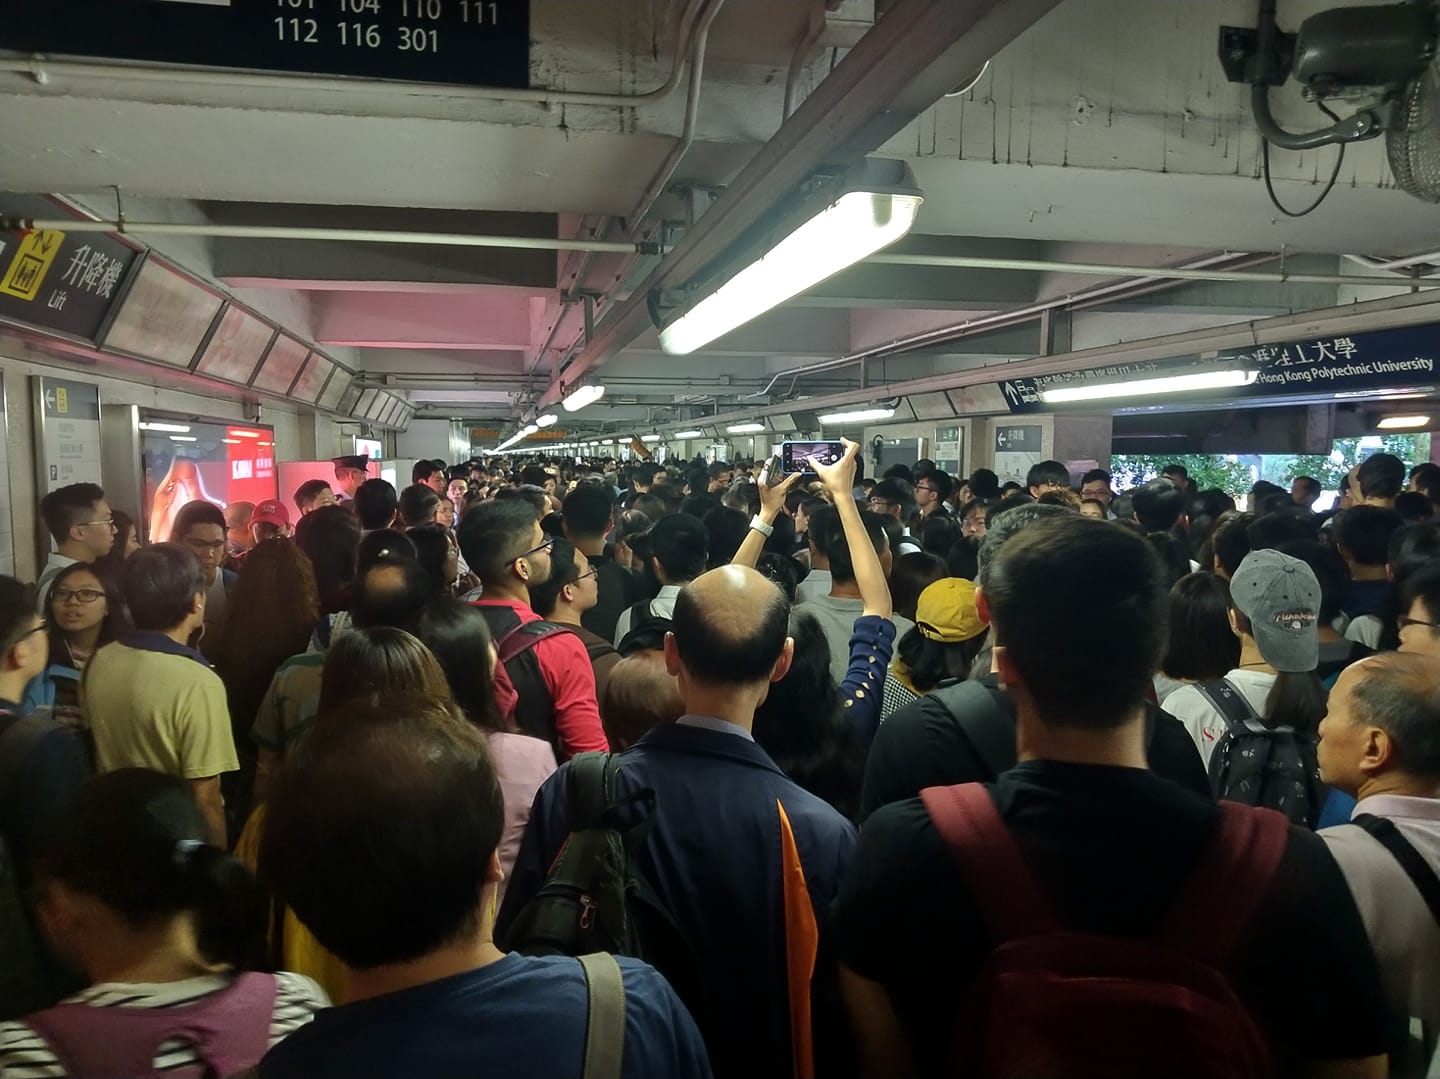 Overpass at the Hung Hom bus terminus is unusually packed at 8:30am. Photo via Facebook/Chris Kwok.